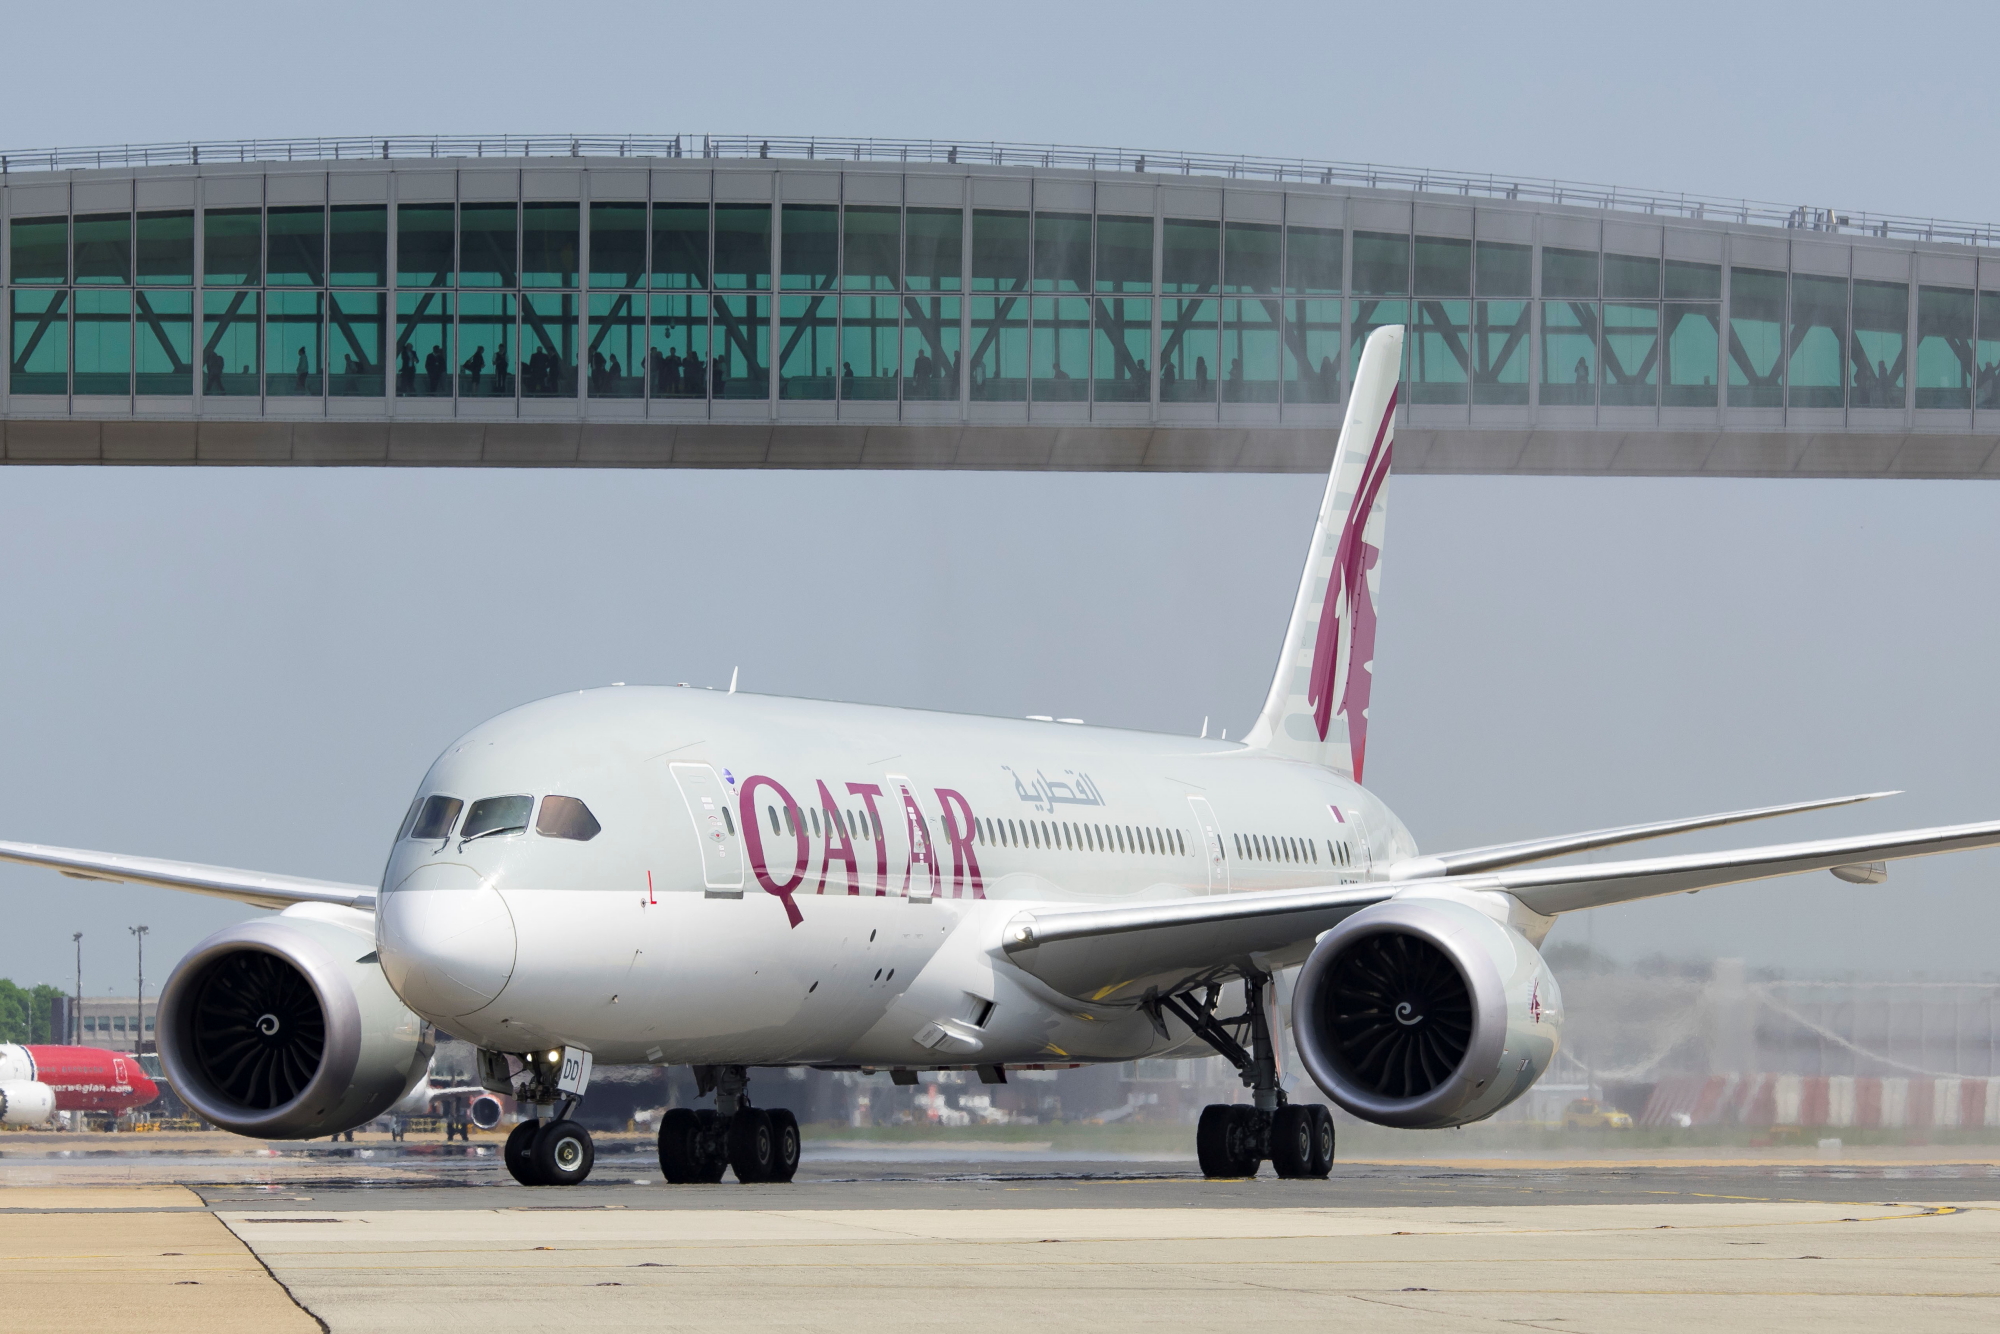 Qatar Airways has launched flights between Doha and London Gatwick. The new double daily service, operated by a Boeing 787 Dreamliner aircraft, makes London Gatwick the airline’s sixth gateway into the United Kingdom and second gateway to London. Click to enlarge.